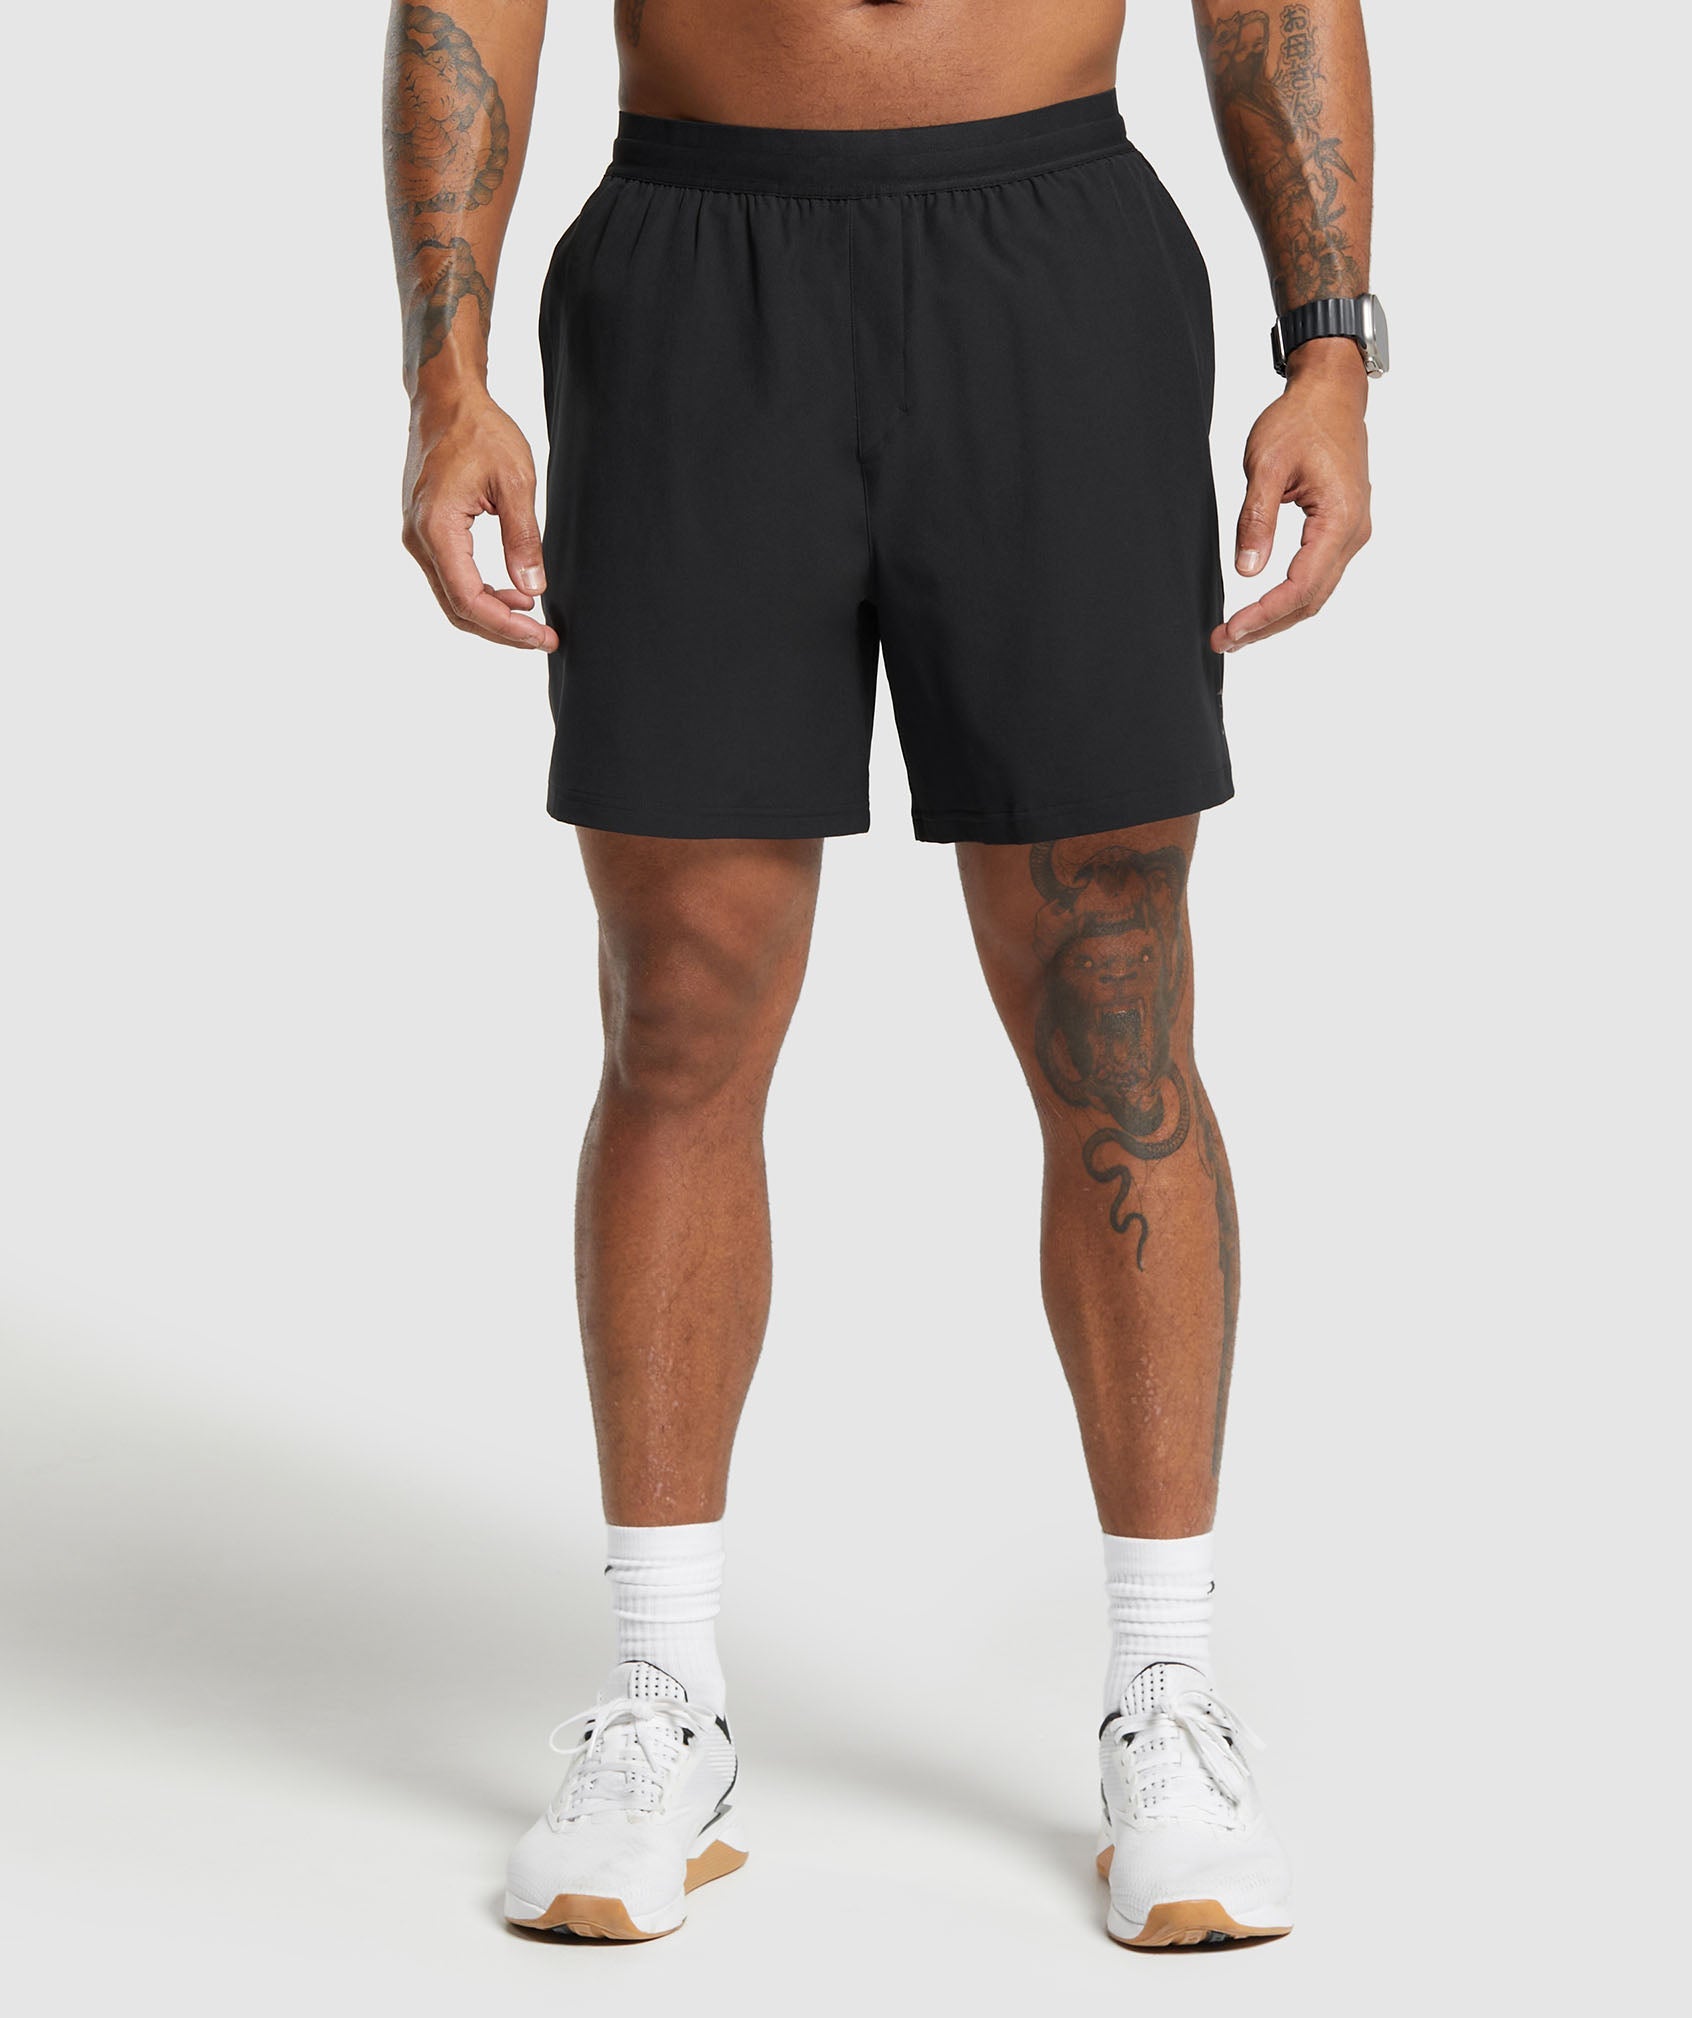 Land to Water 6" Shorts in Black